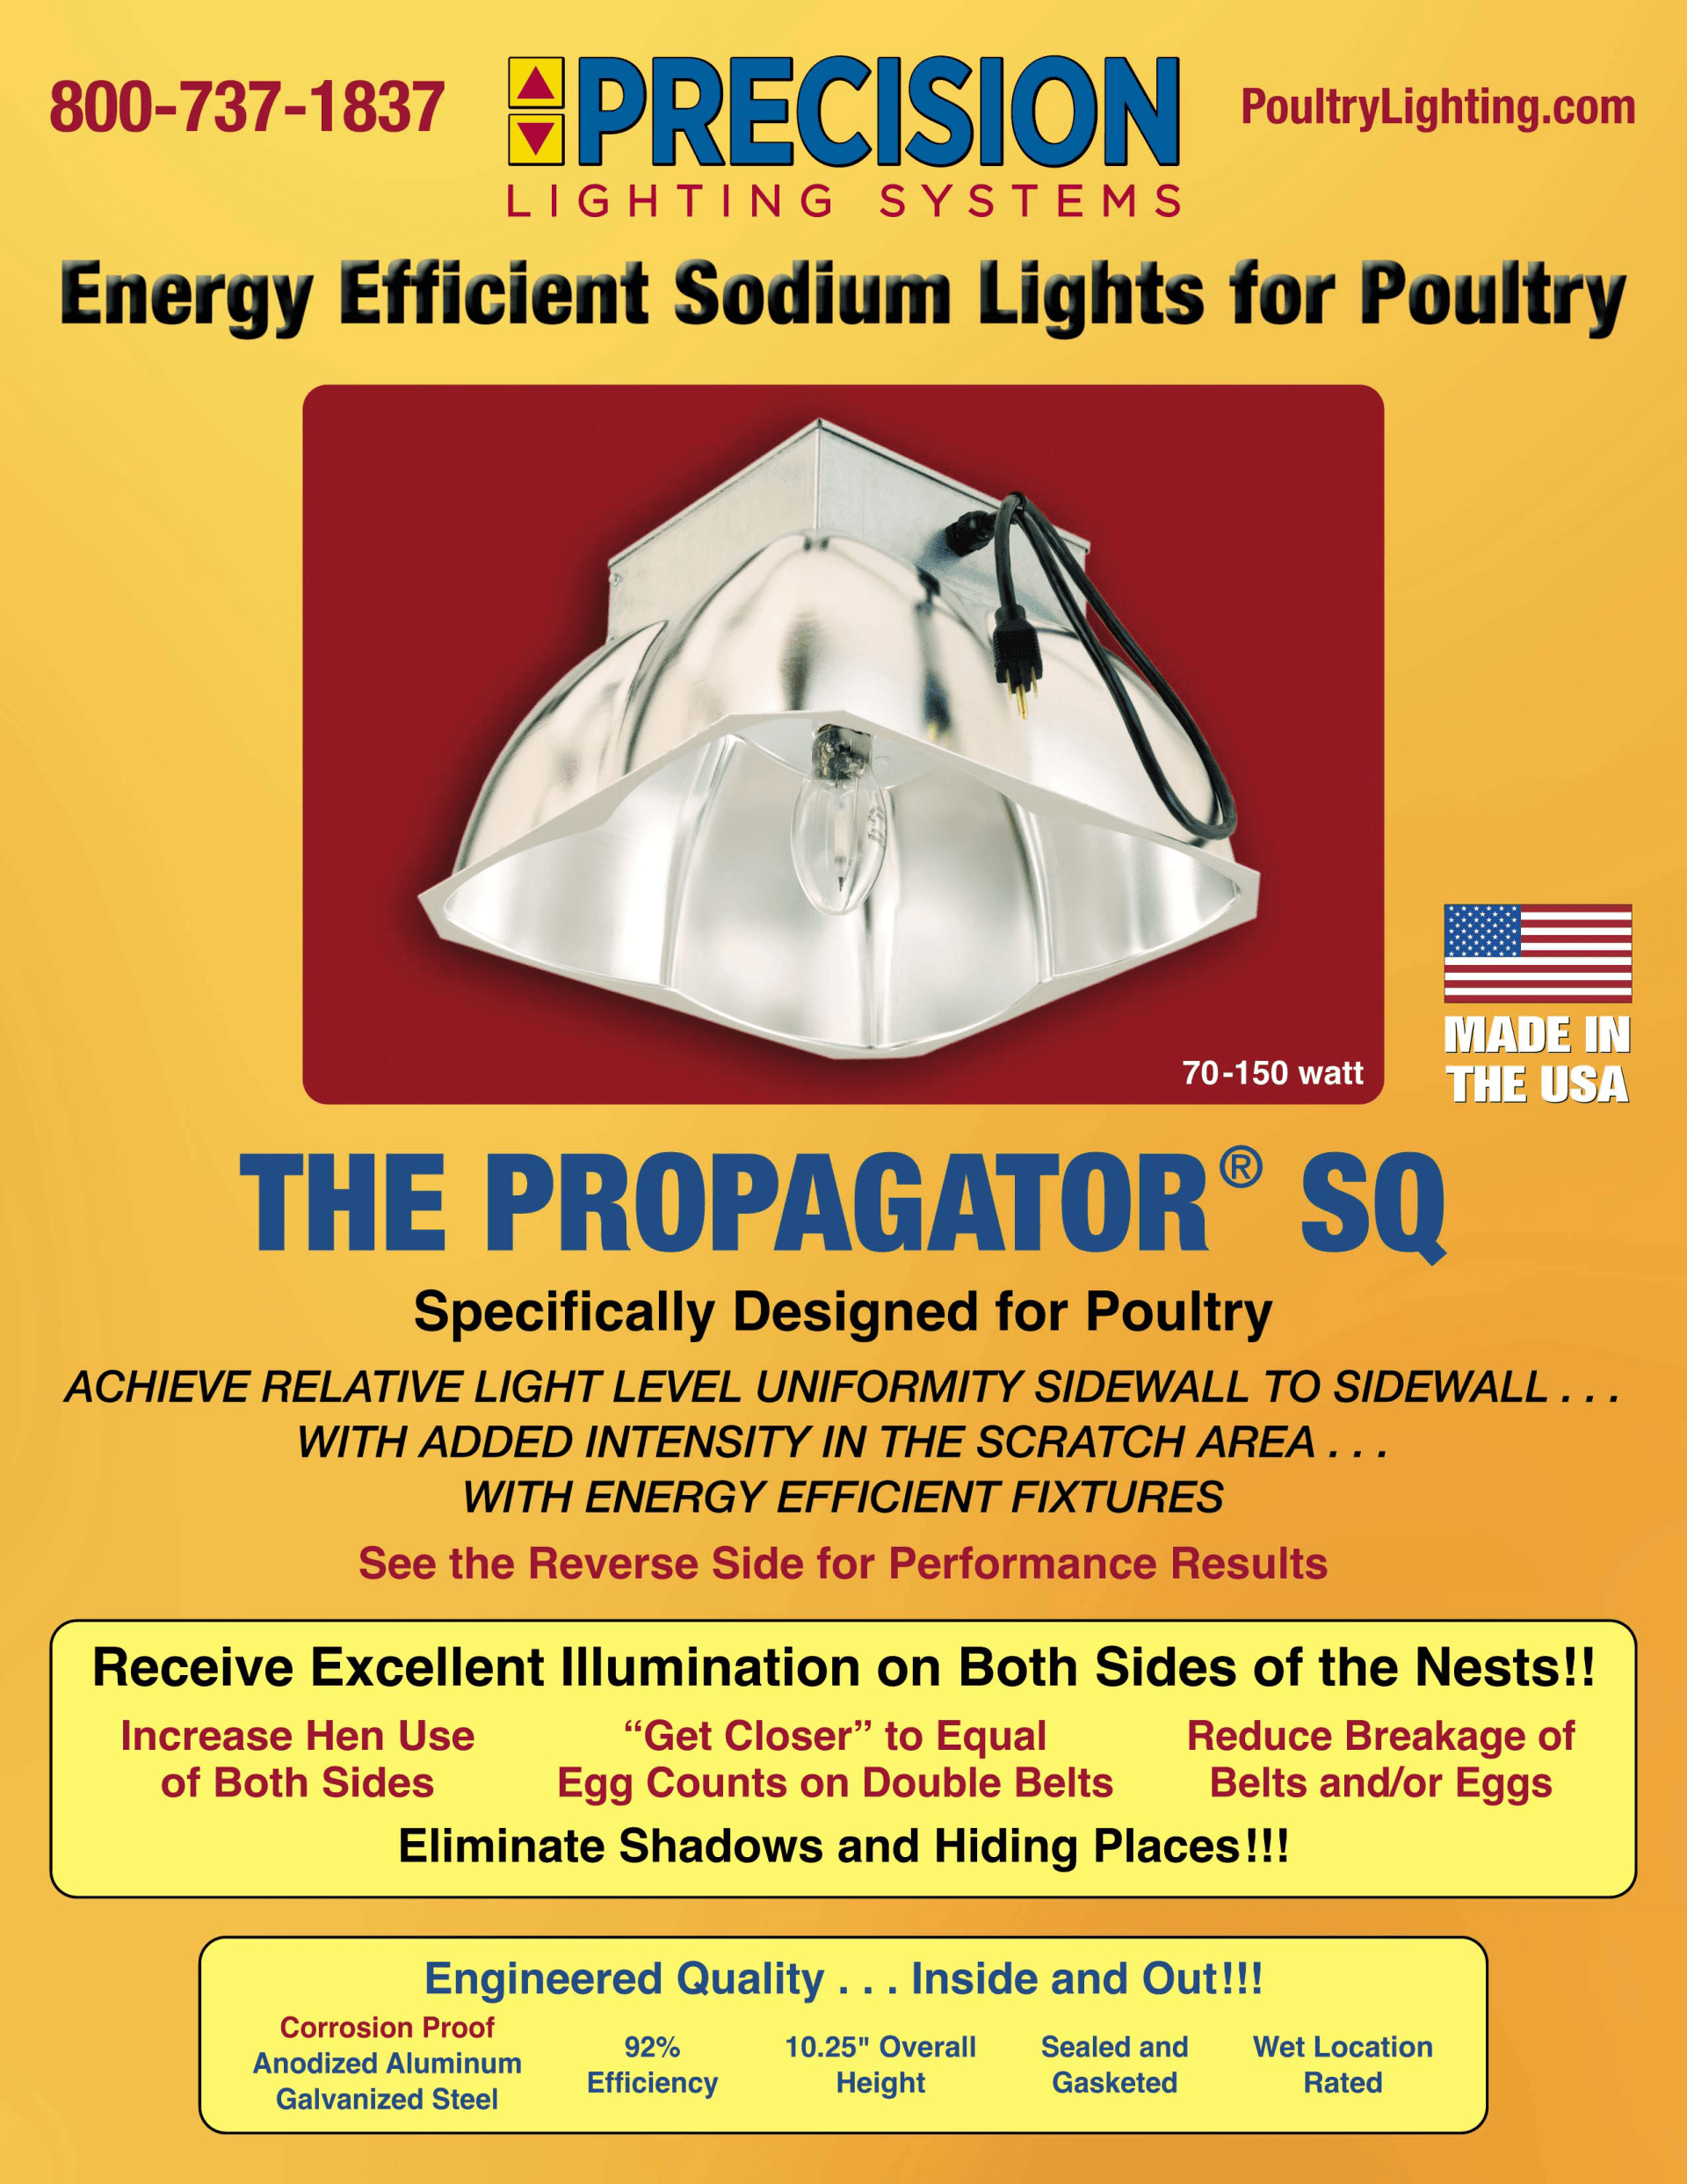 An advertisement for precision lighting systems energy efficient sodium lights for poultry